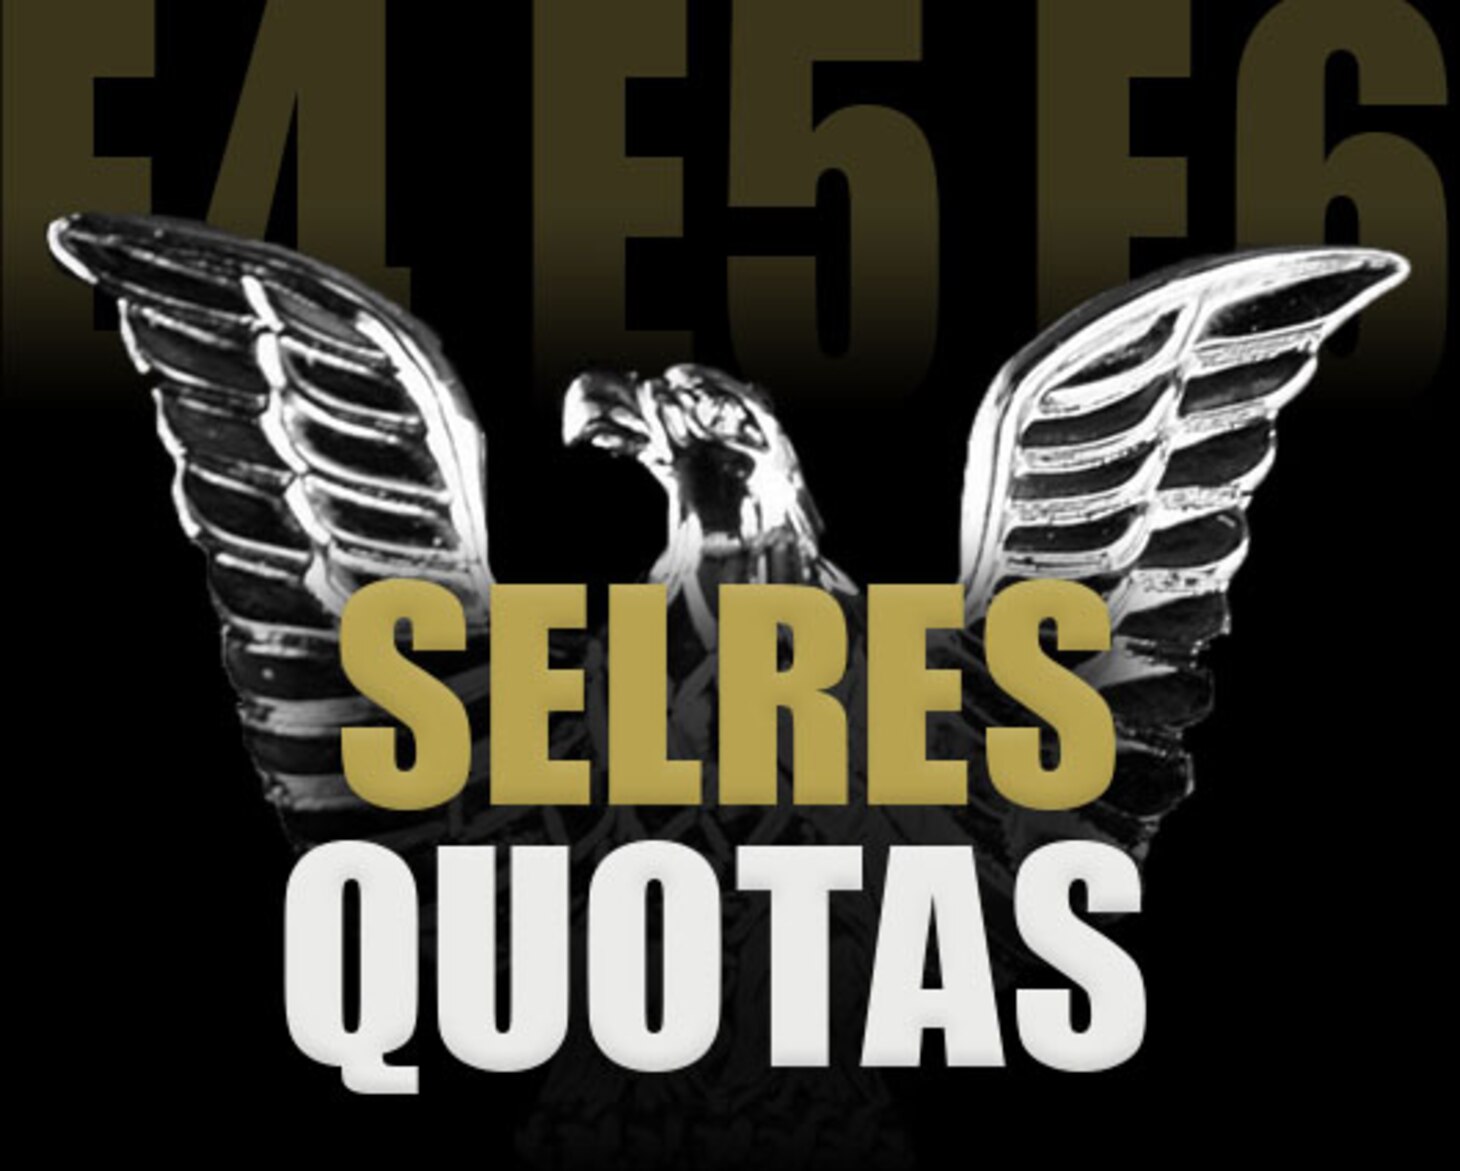 E4-E6 SELRES Quotas Released > Navy All Hands > Stories